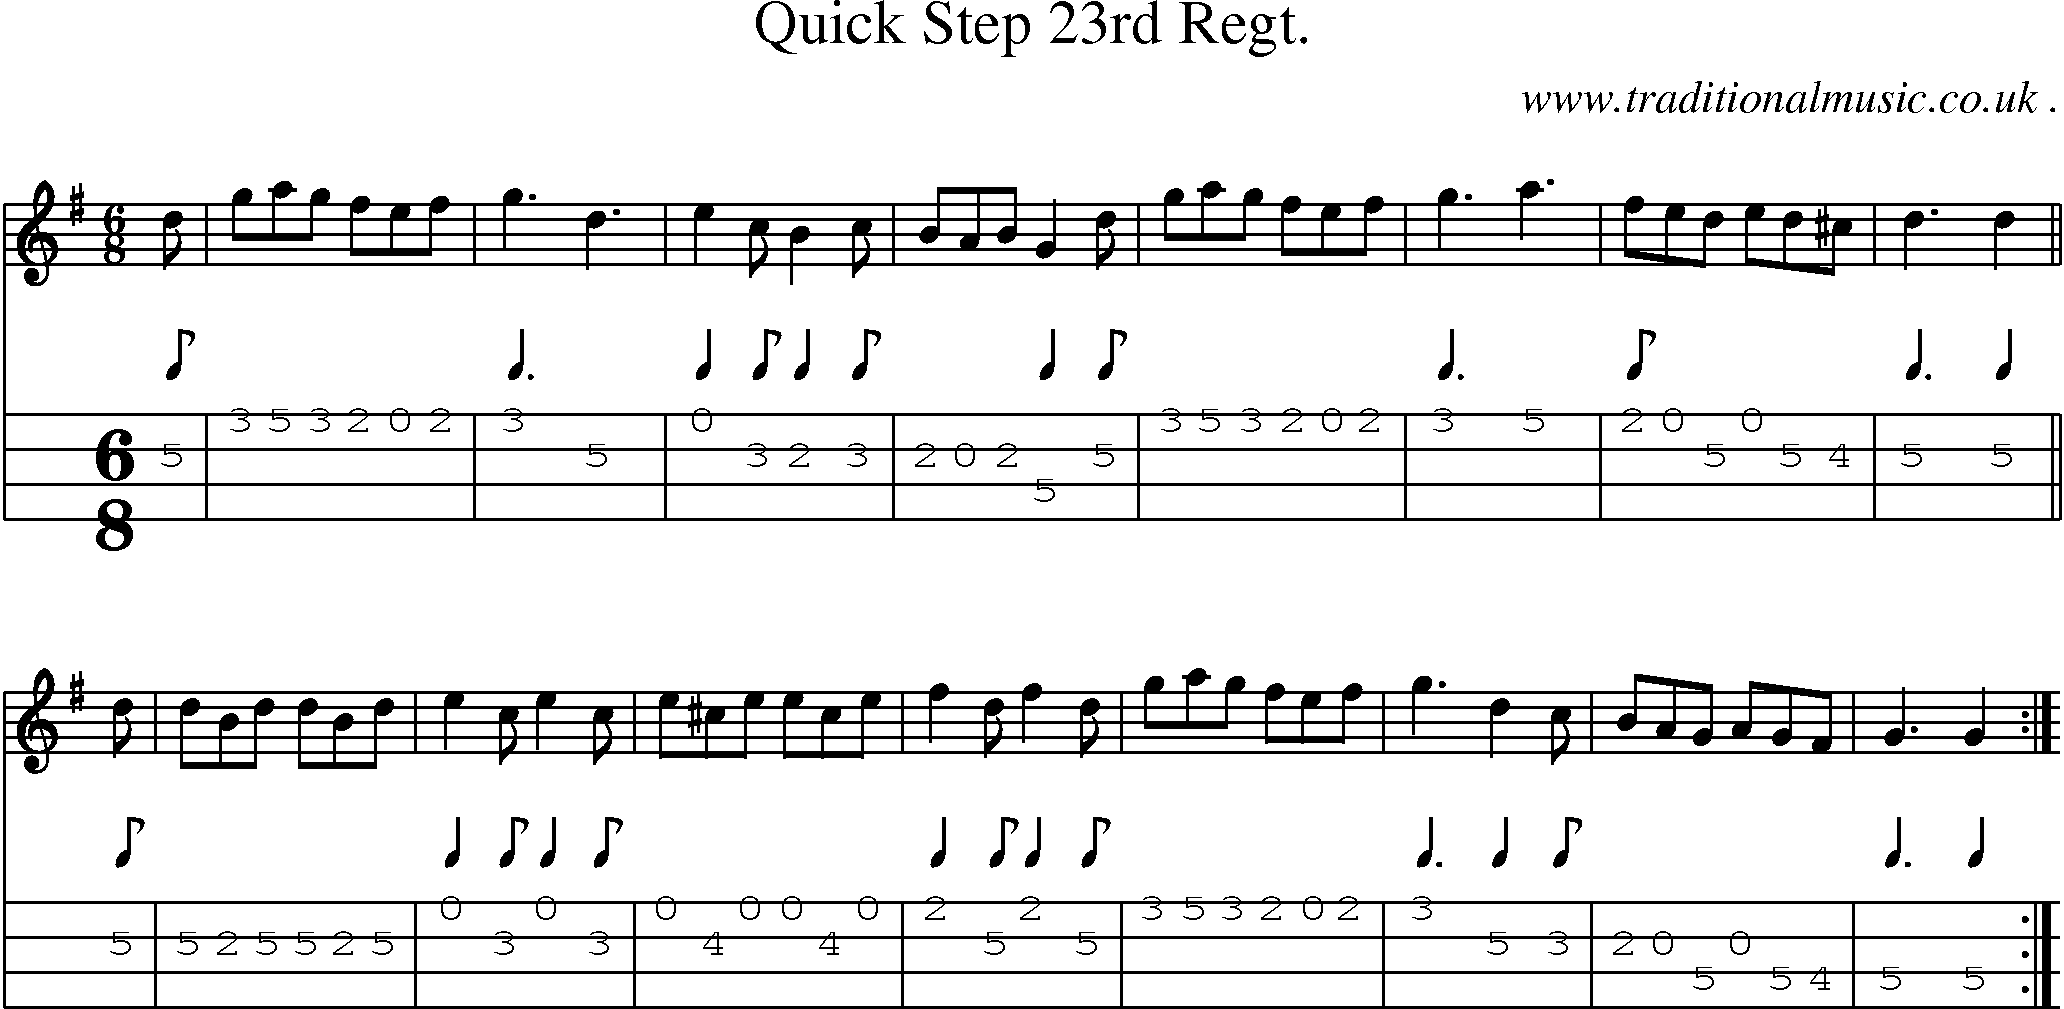 Sheet-Music and Mandolin Tabs for Quick Step 23rd Regt